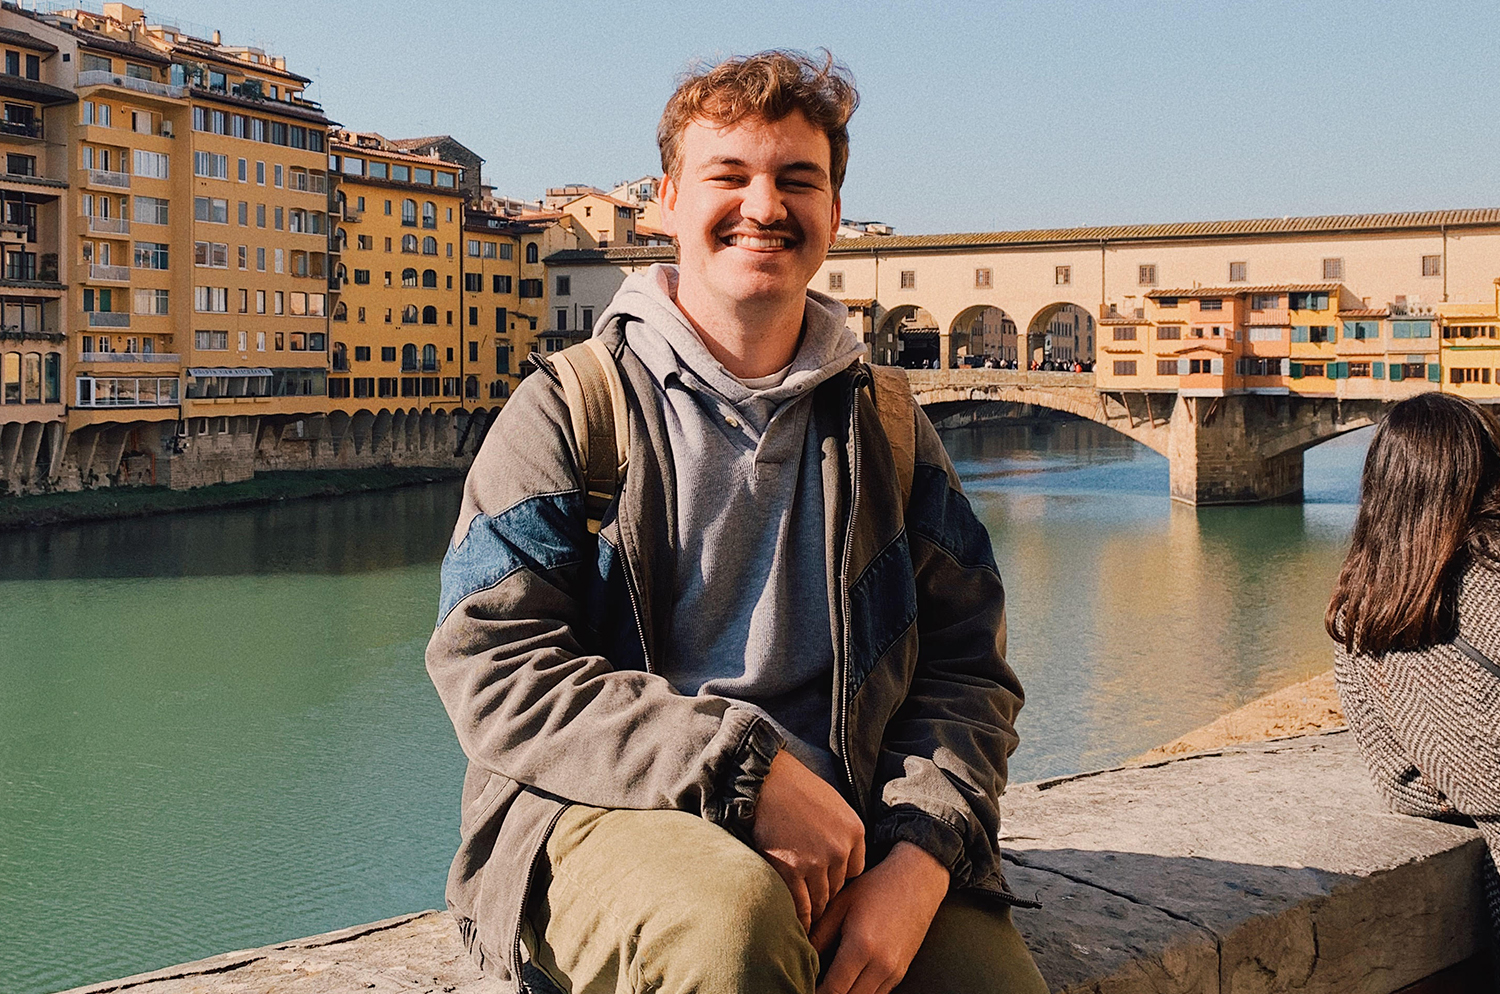 English senior smiling next to a canal in Italy. 